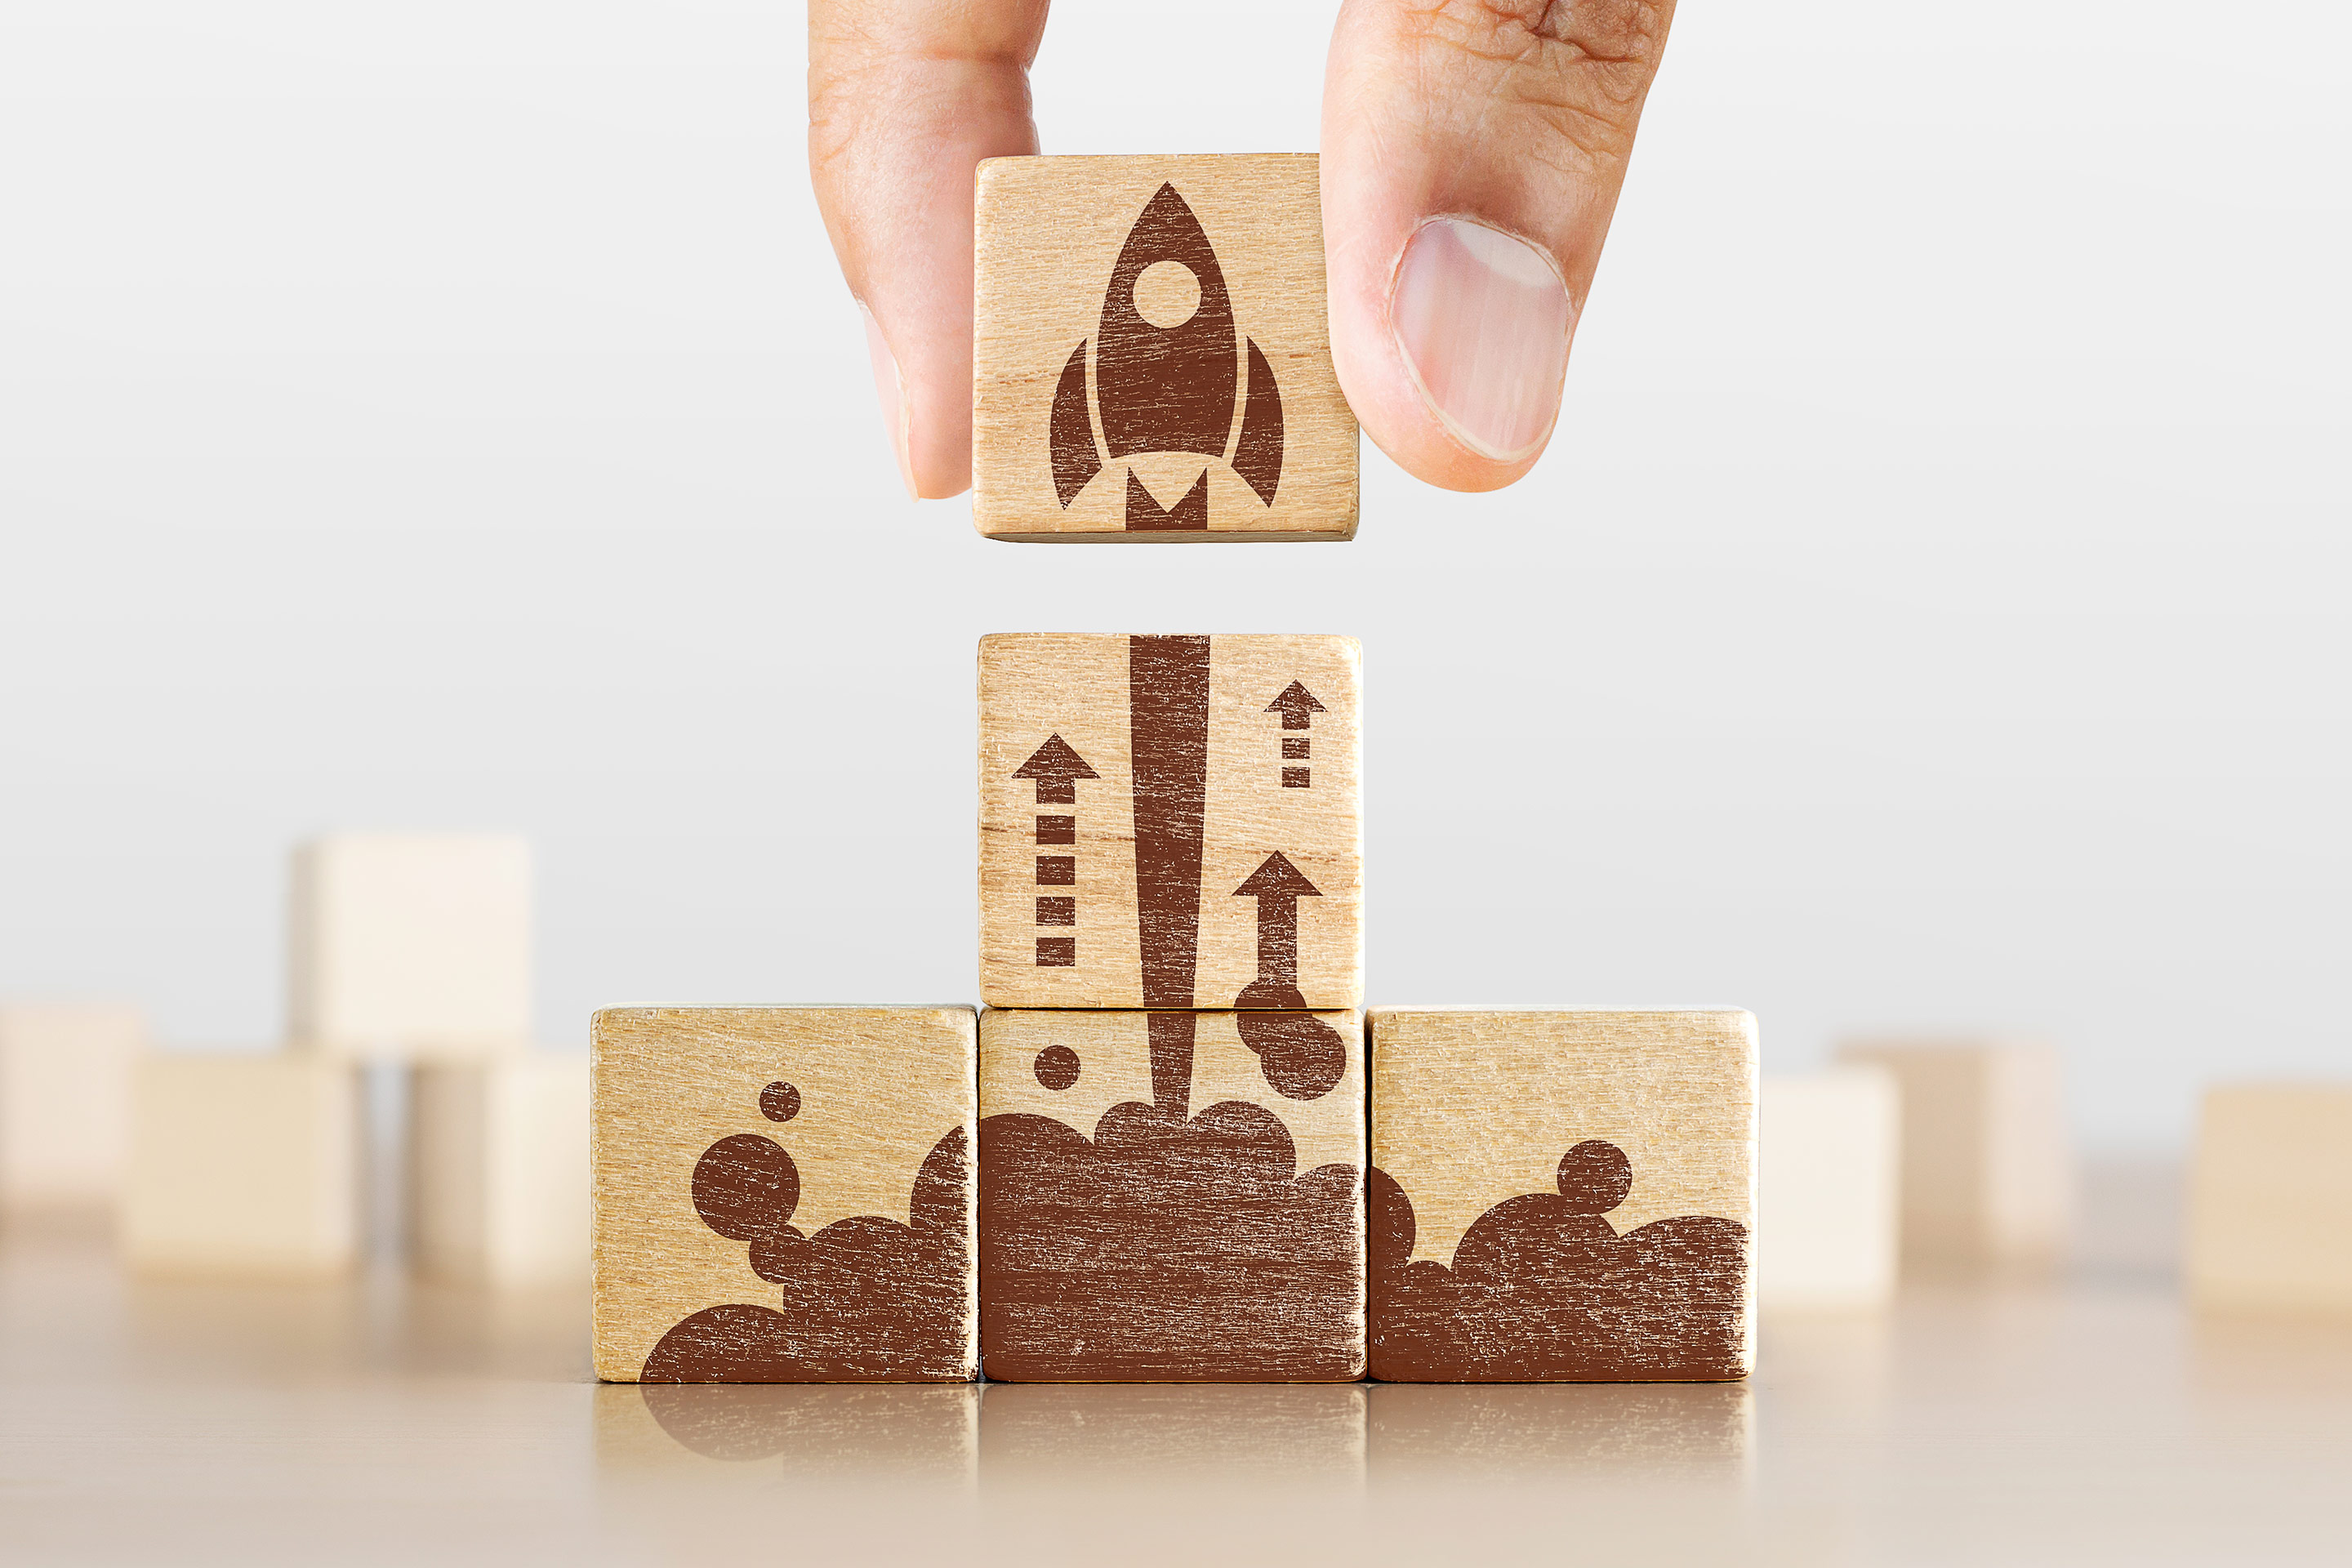 Image of a hand completing a wooden rocket ship puzzle, representing progress and modernization